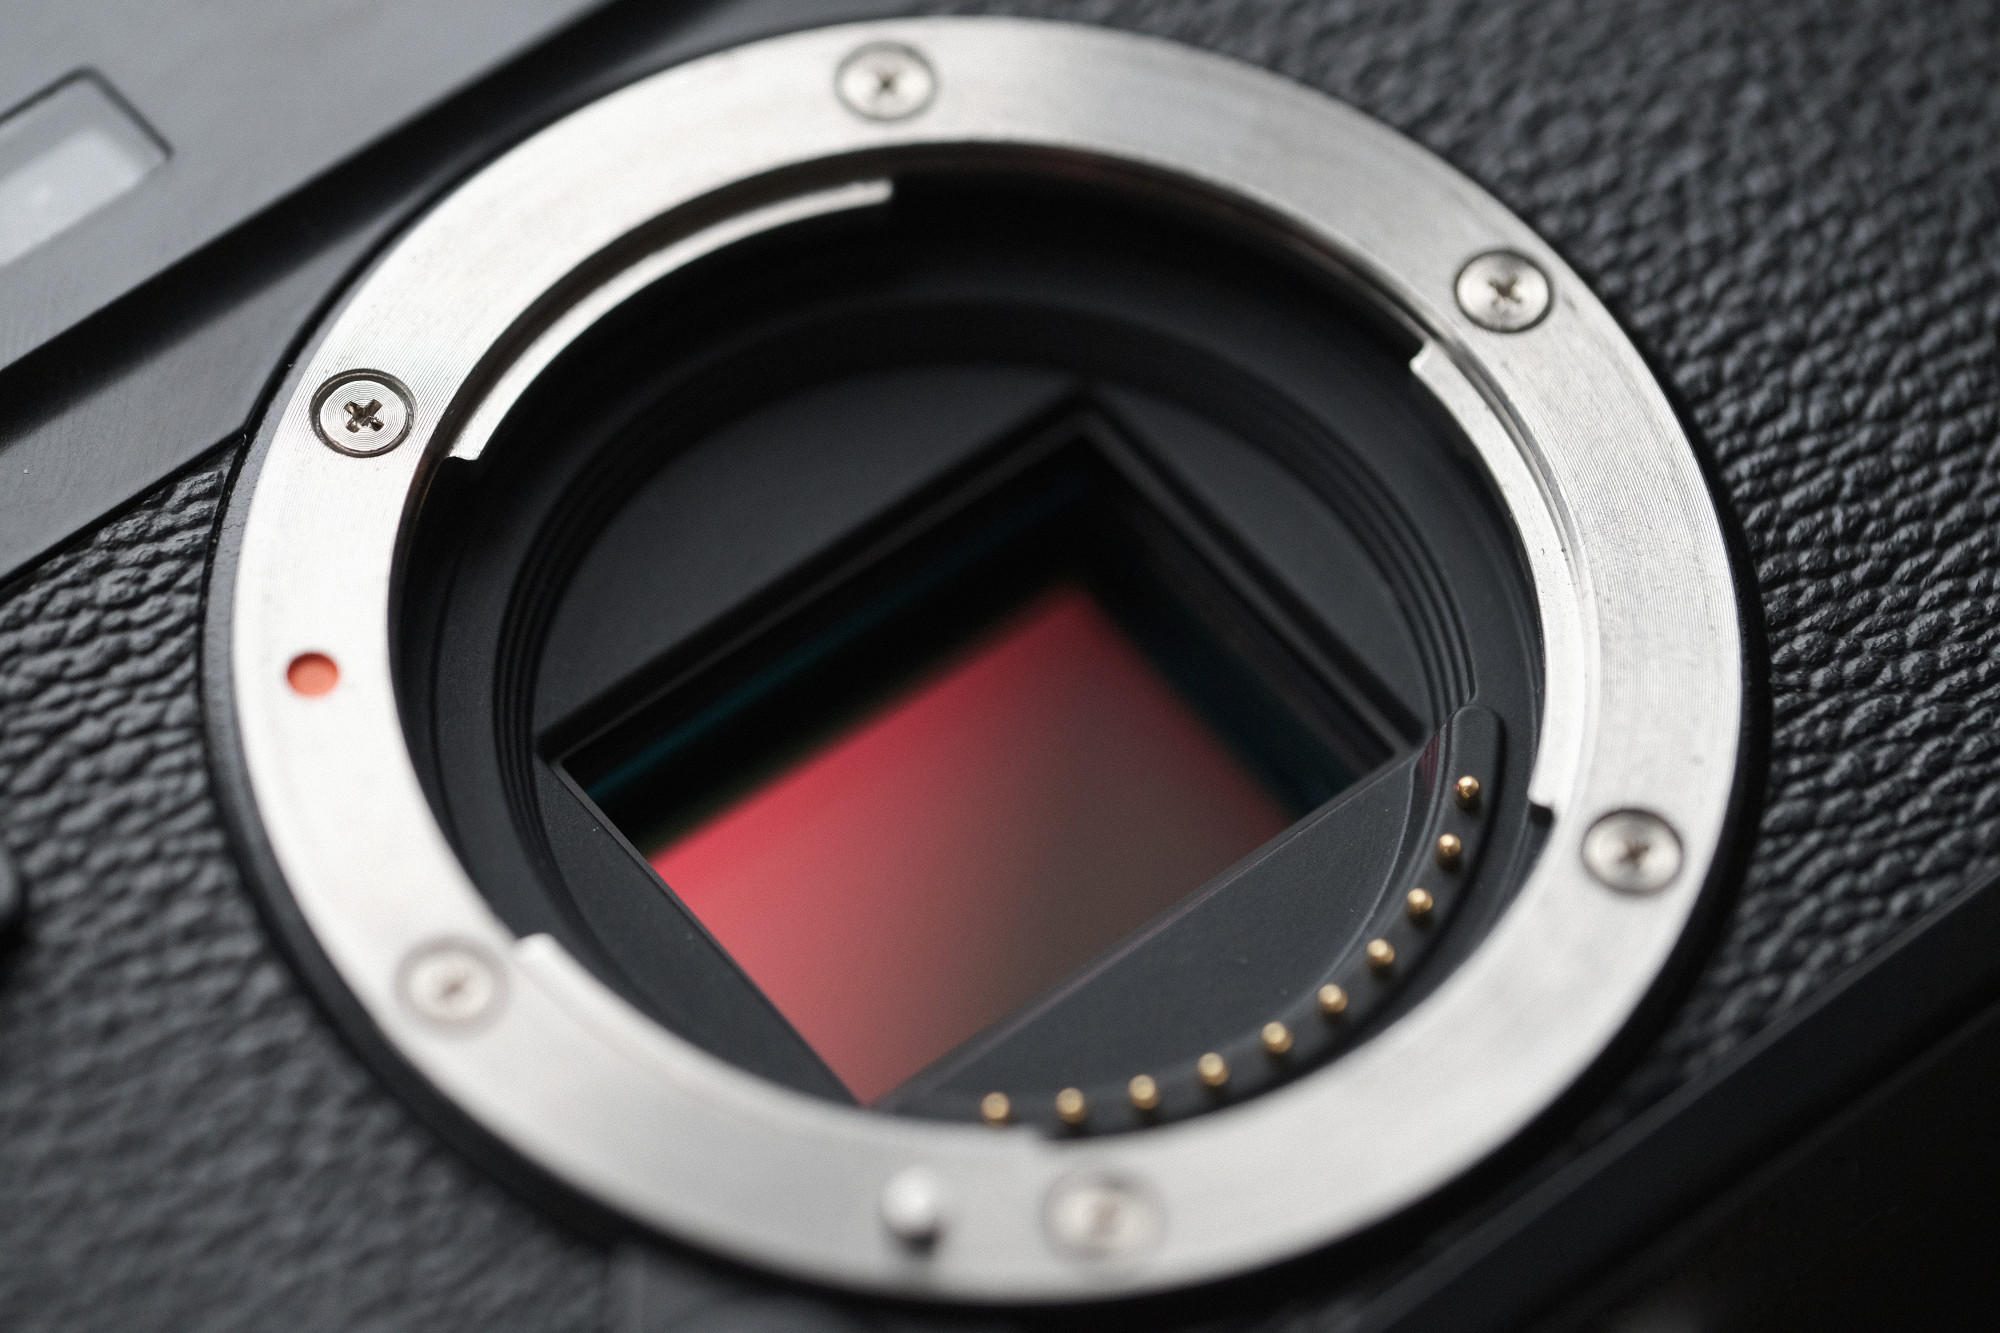 Finding the Best Mirrorless Camera: 7 Essential Qualities to Look For